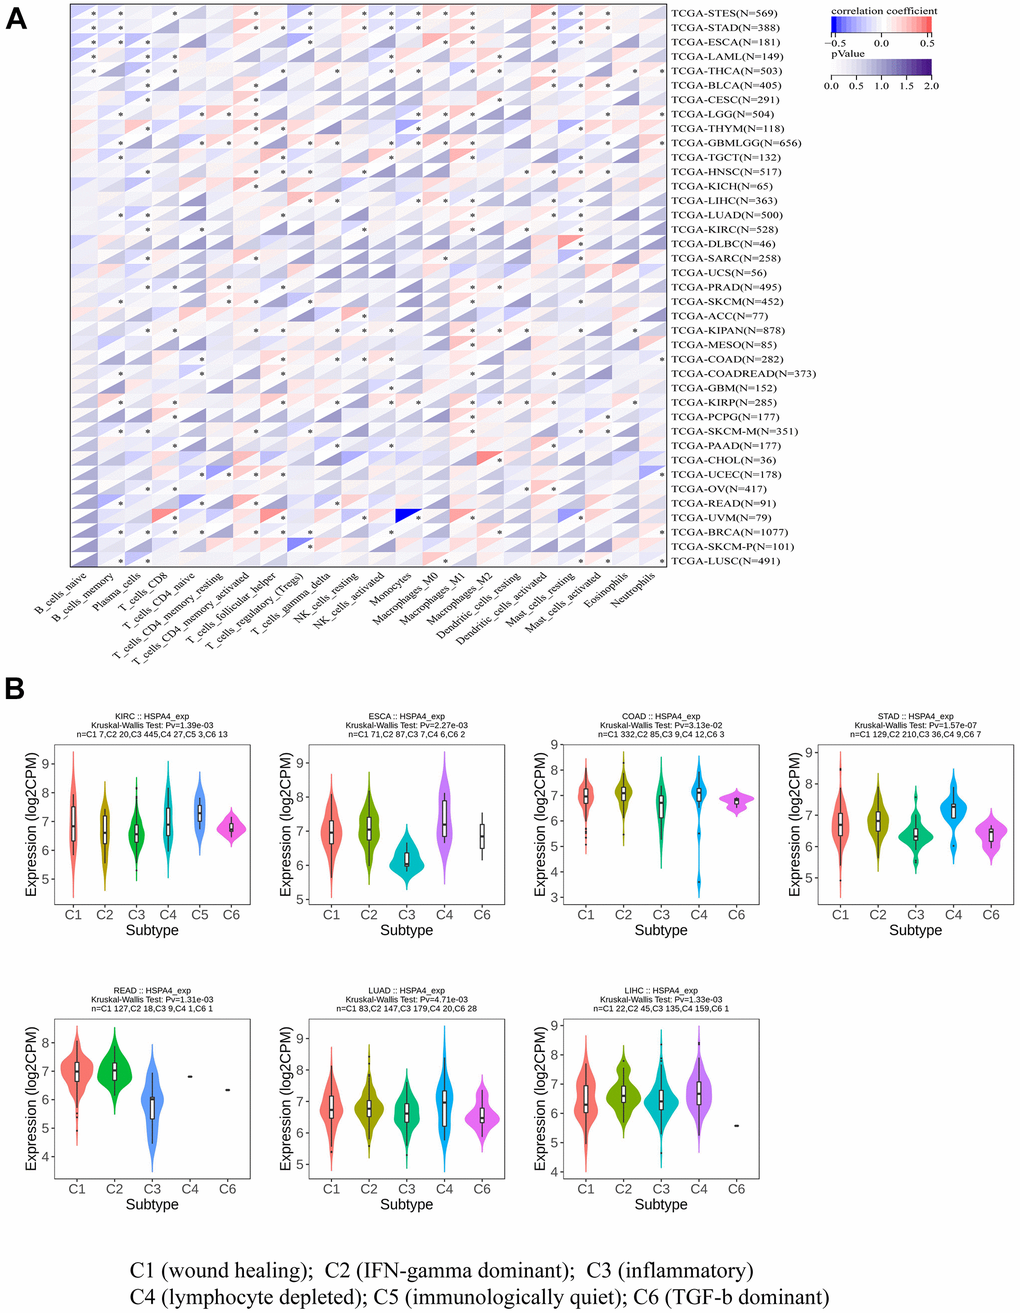 HSPA4 in relation to immune cell and immune subtyping analysis. (A) Association analysis between pan-cancer and immune-related cells. (B) Correlation between HSPA4 expression and immune subtypes in seven cancers.